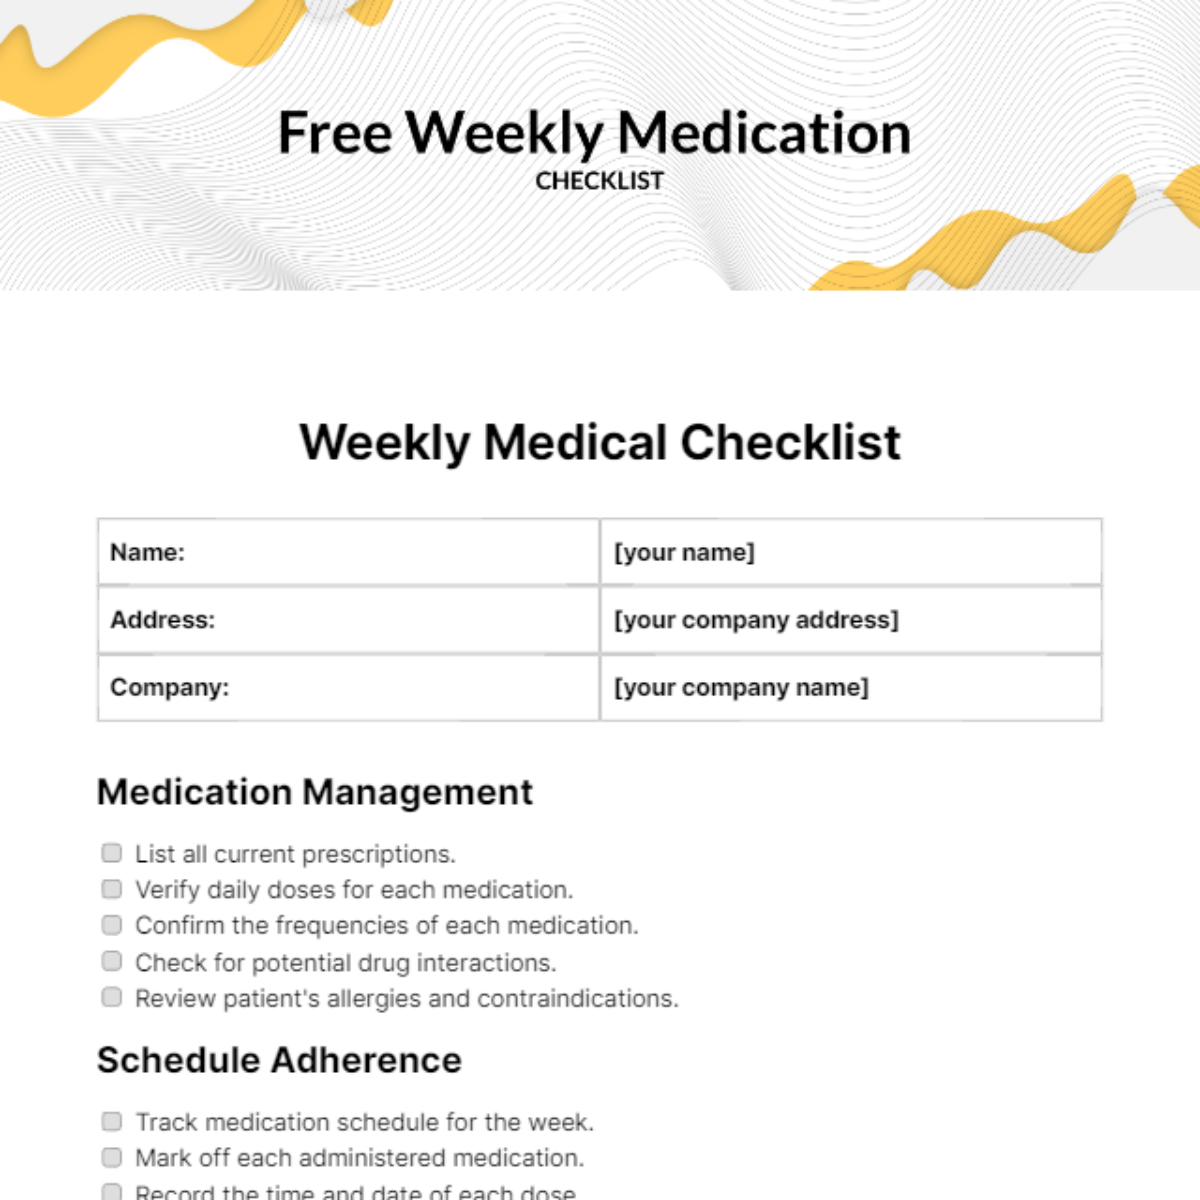 Free Weekly Medication Checklist Template